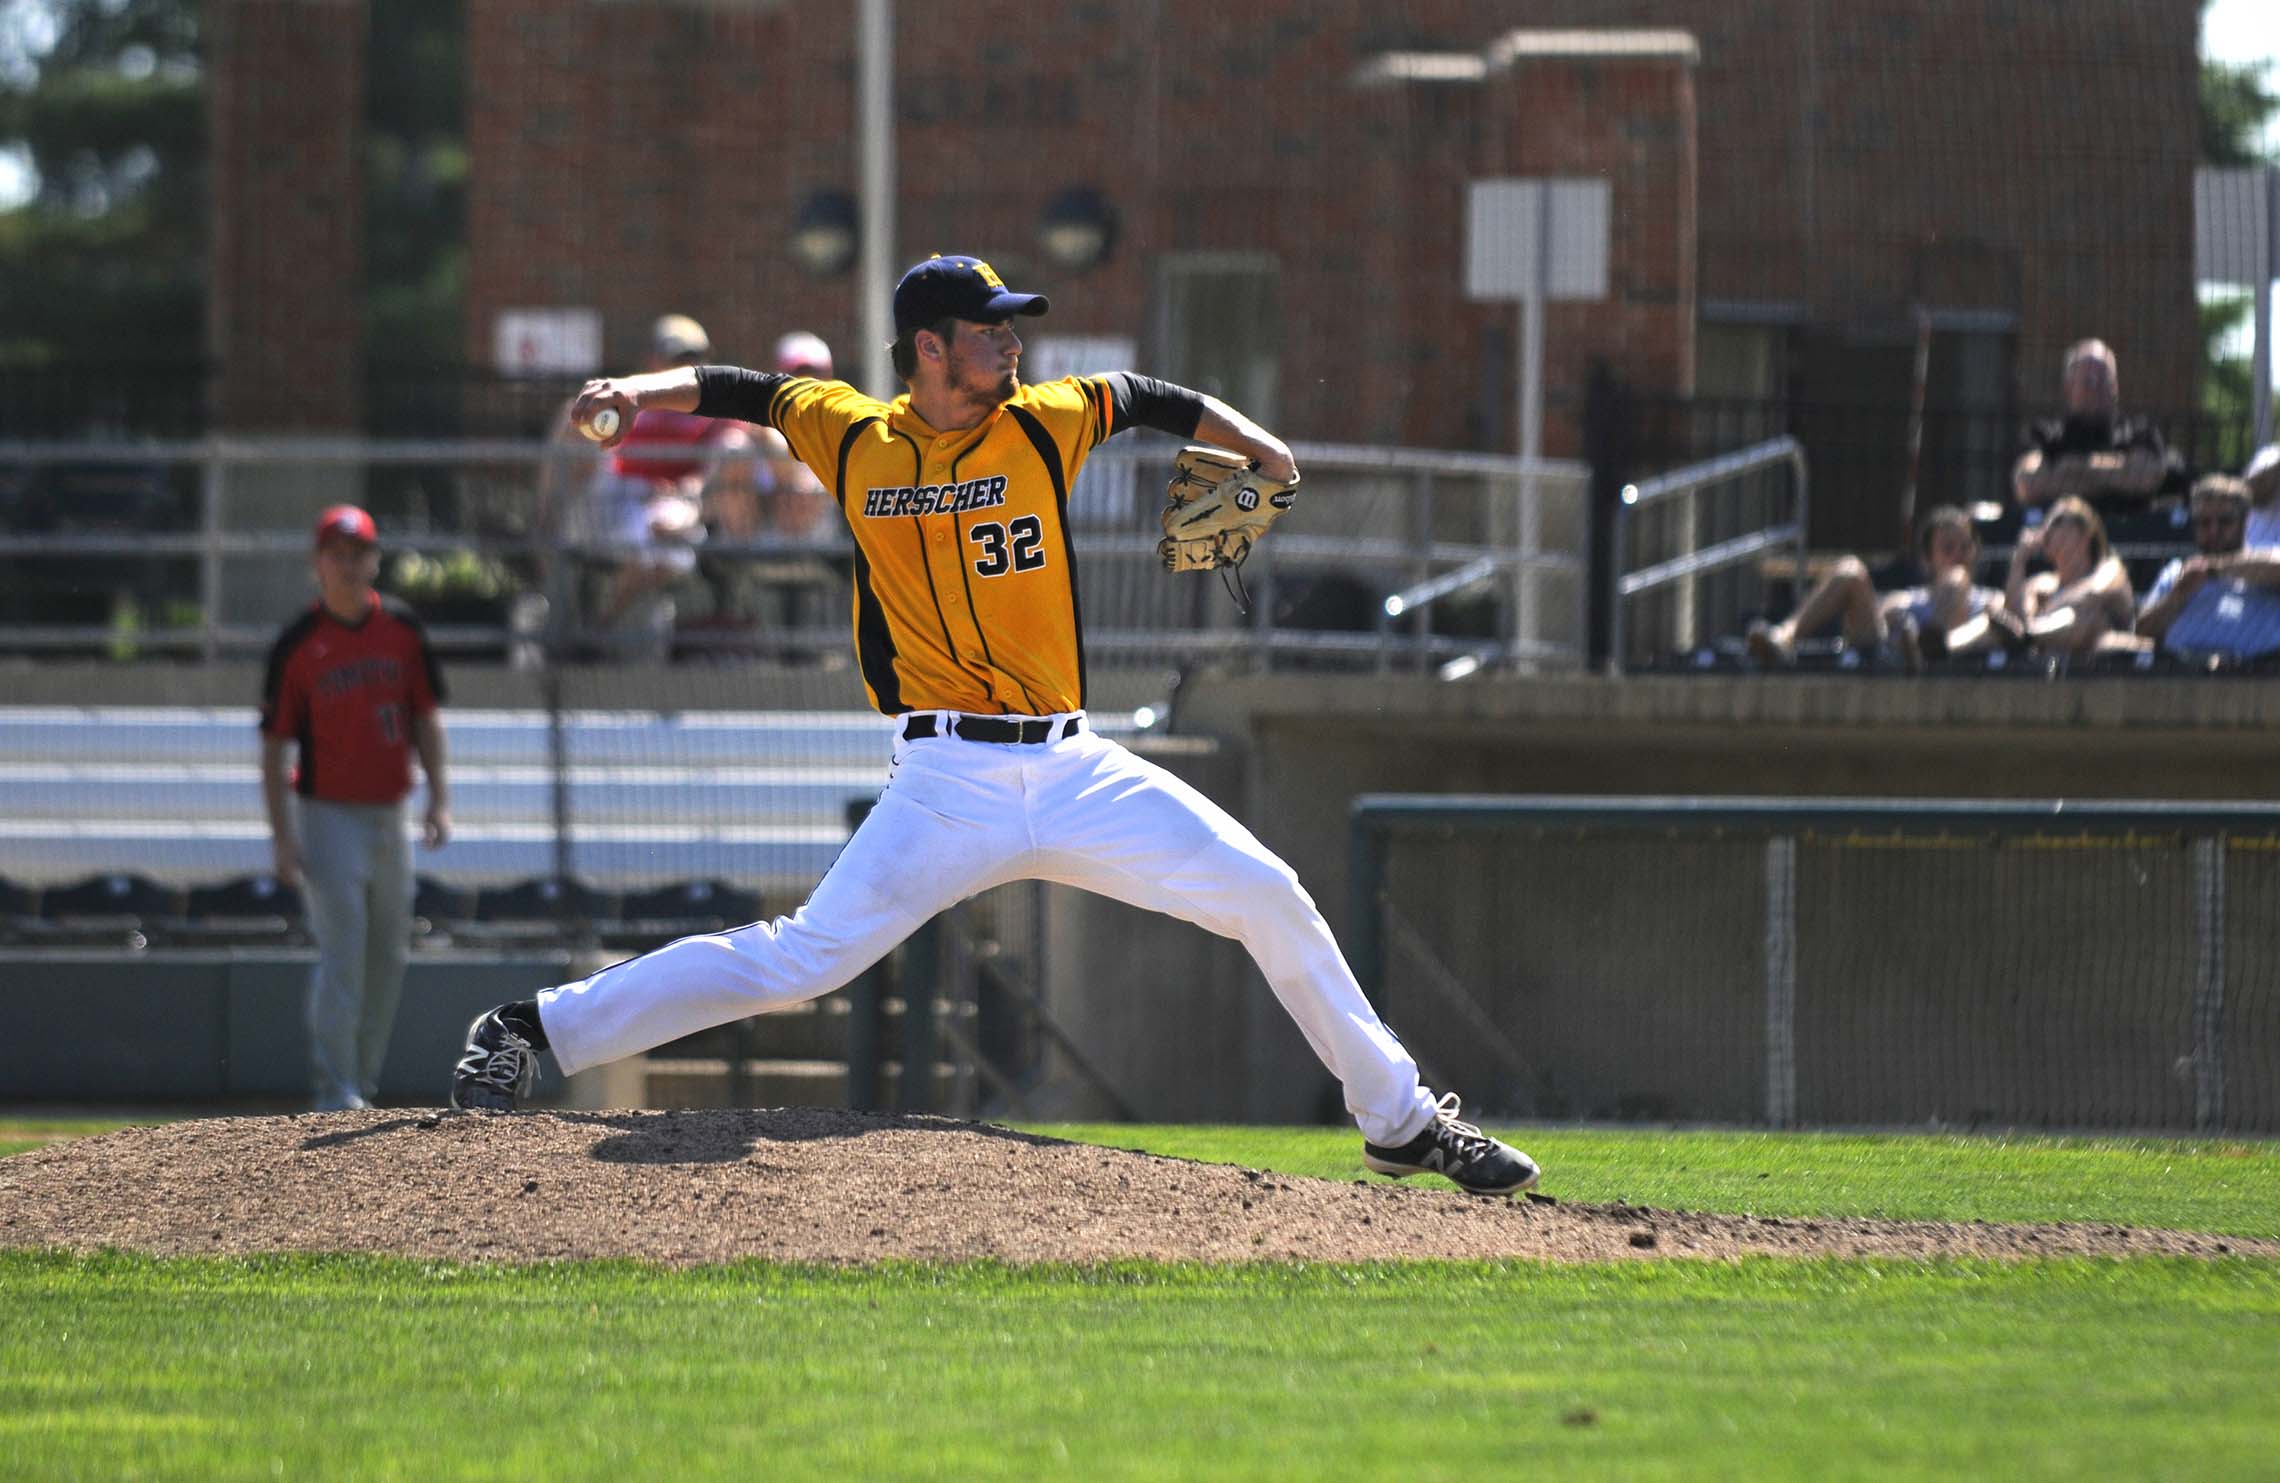  Herscher High School’s Ty Stuart throws a pitch during a pitching duels game Monday at Benedictine University in Lisle. 